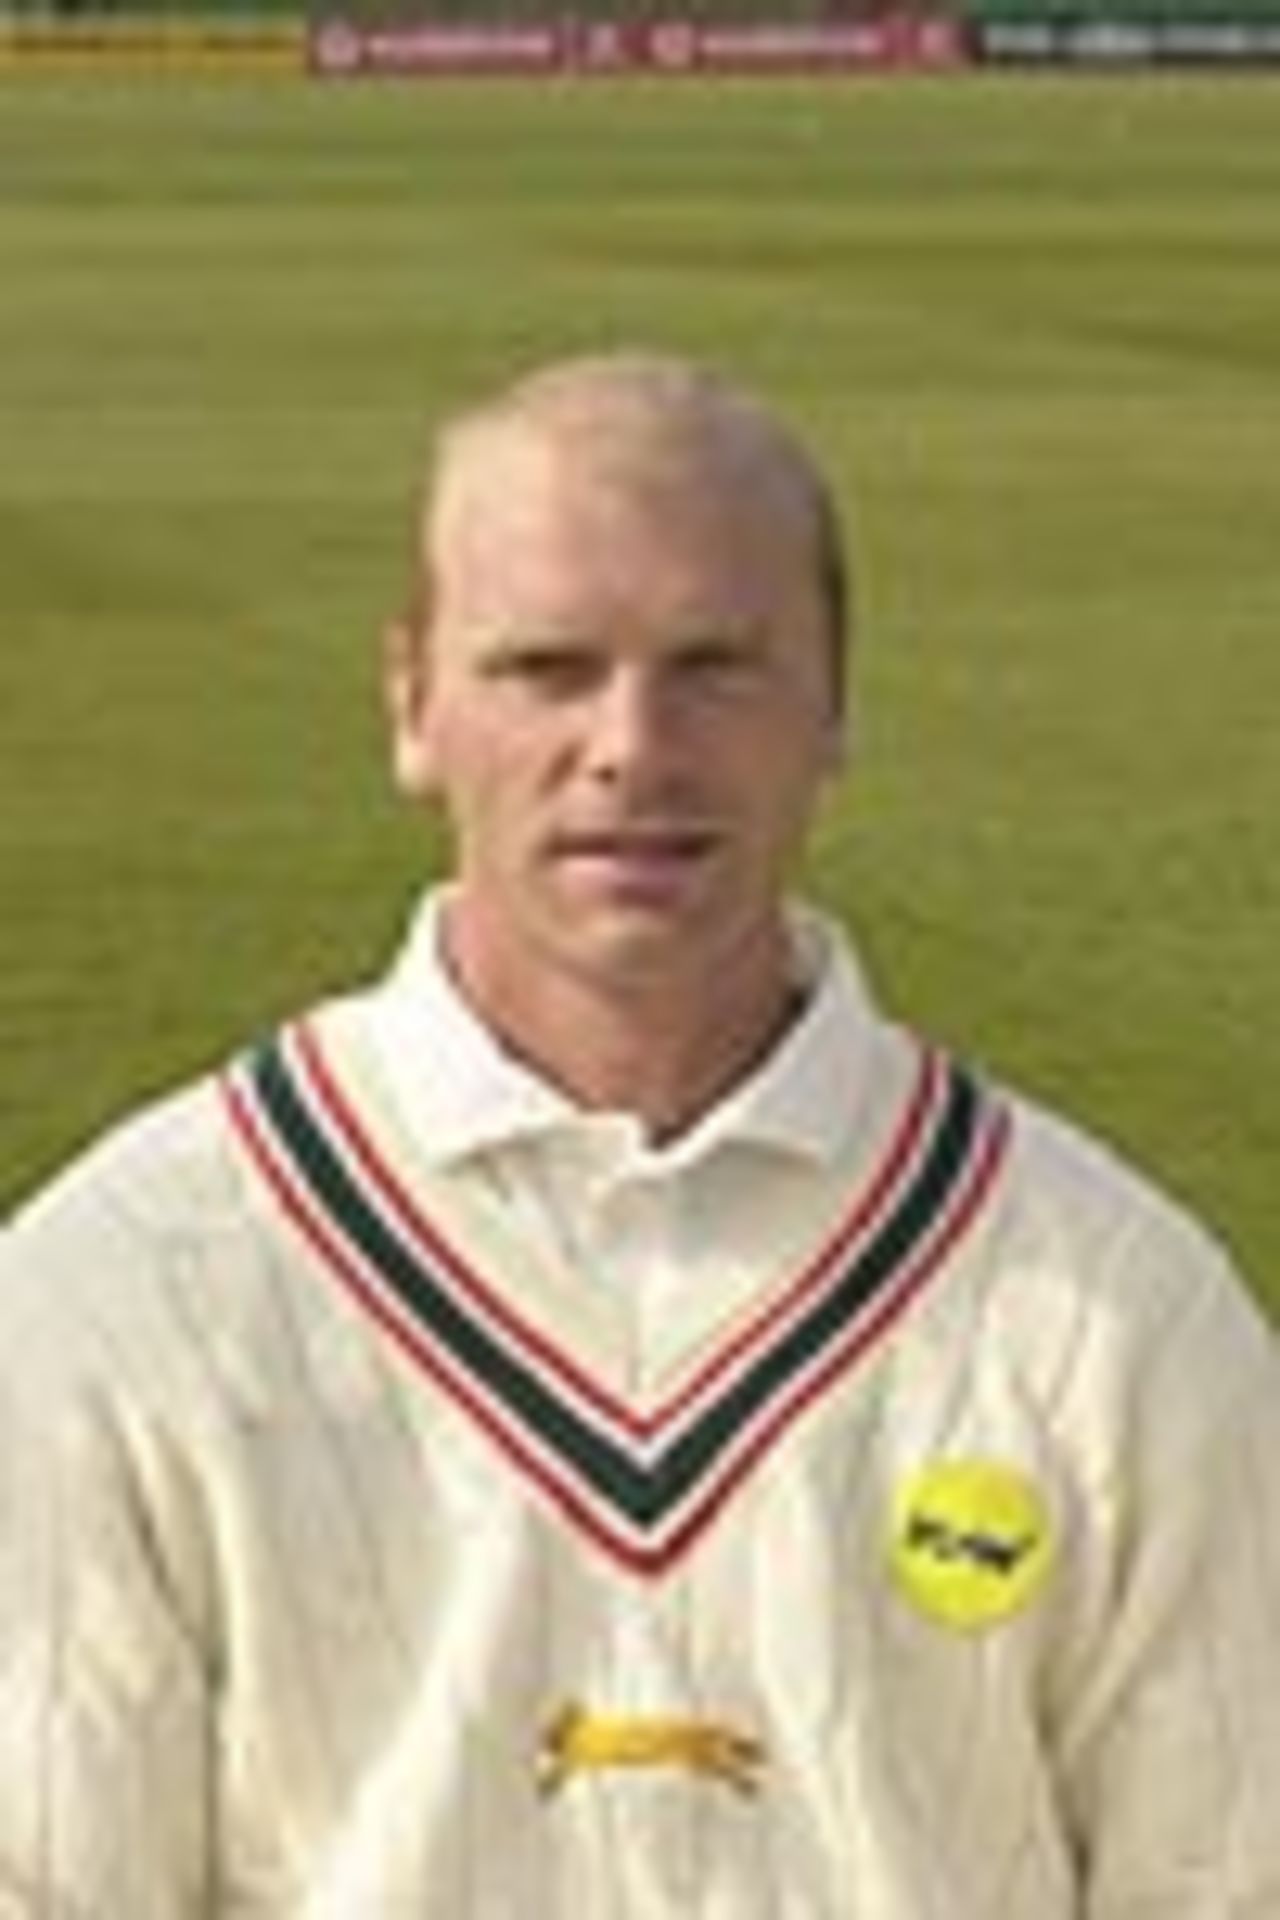 Taken at the 2002 Leicestershire CCC photocall